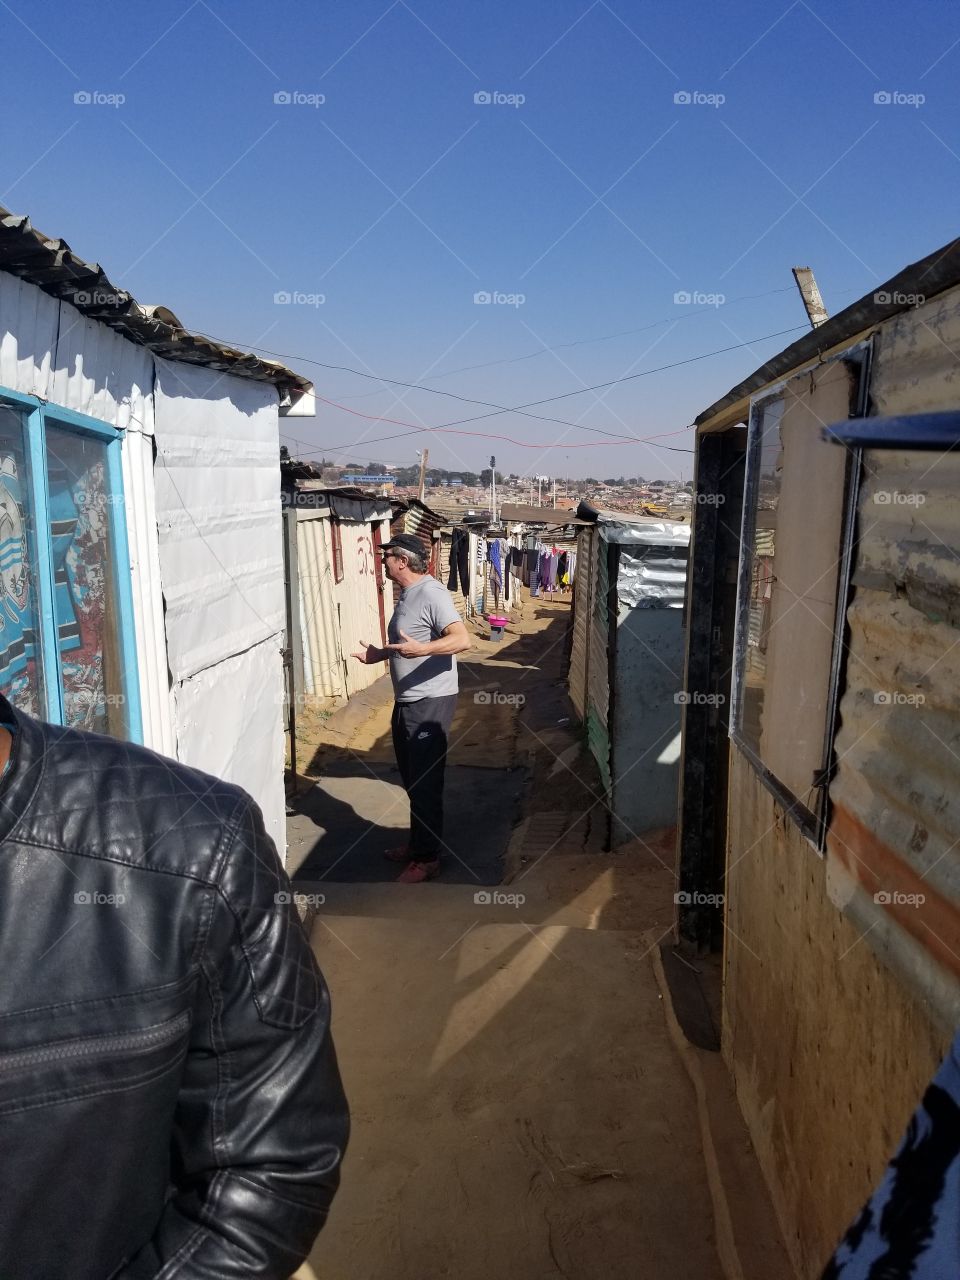 Slums of South Africa